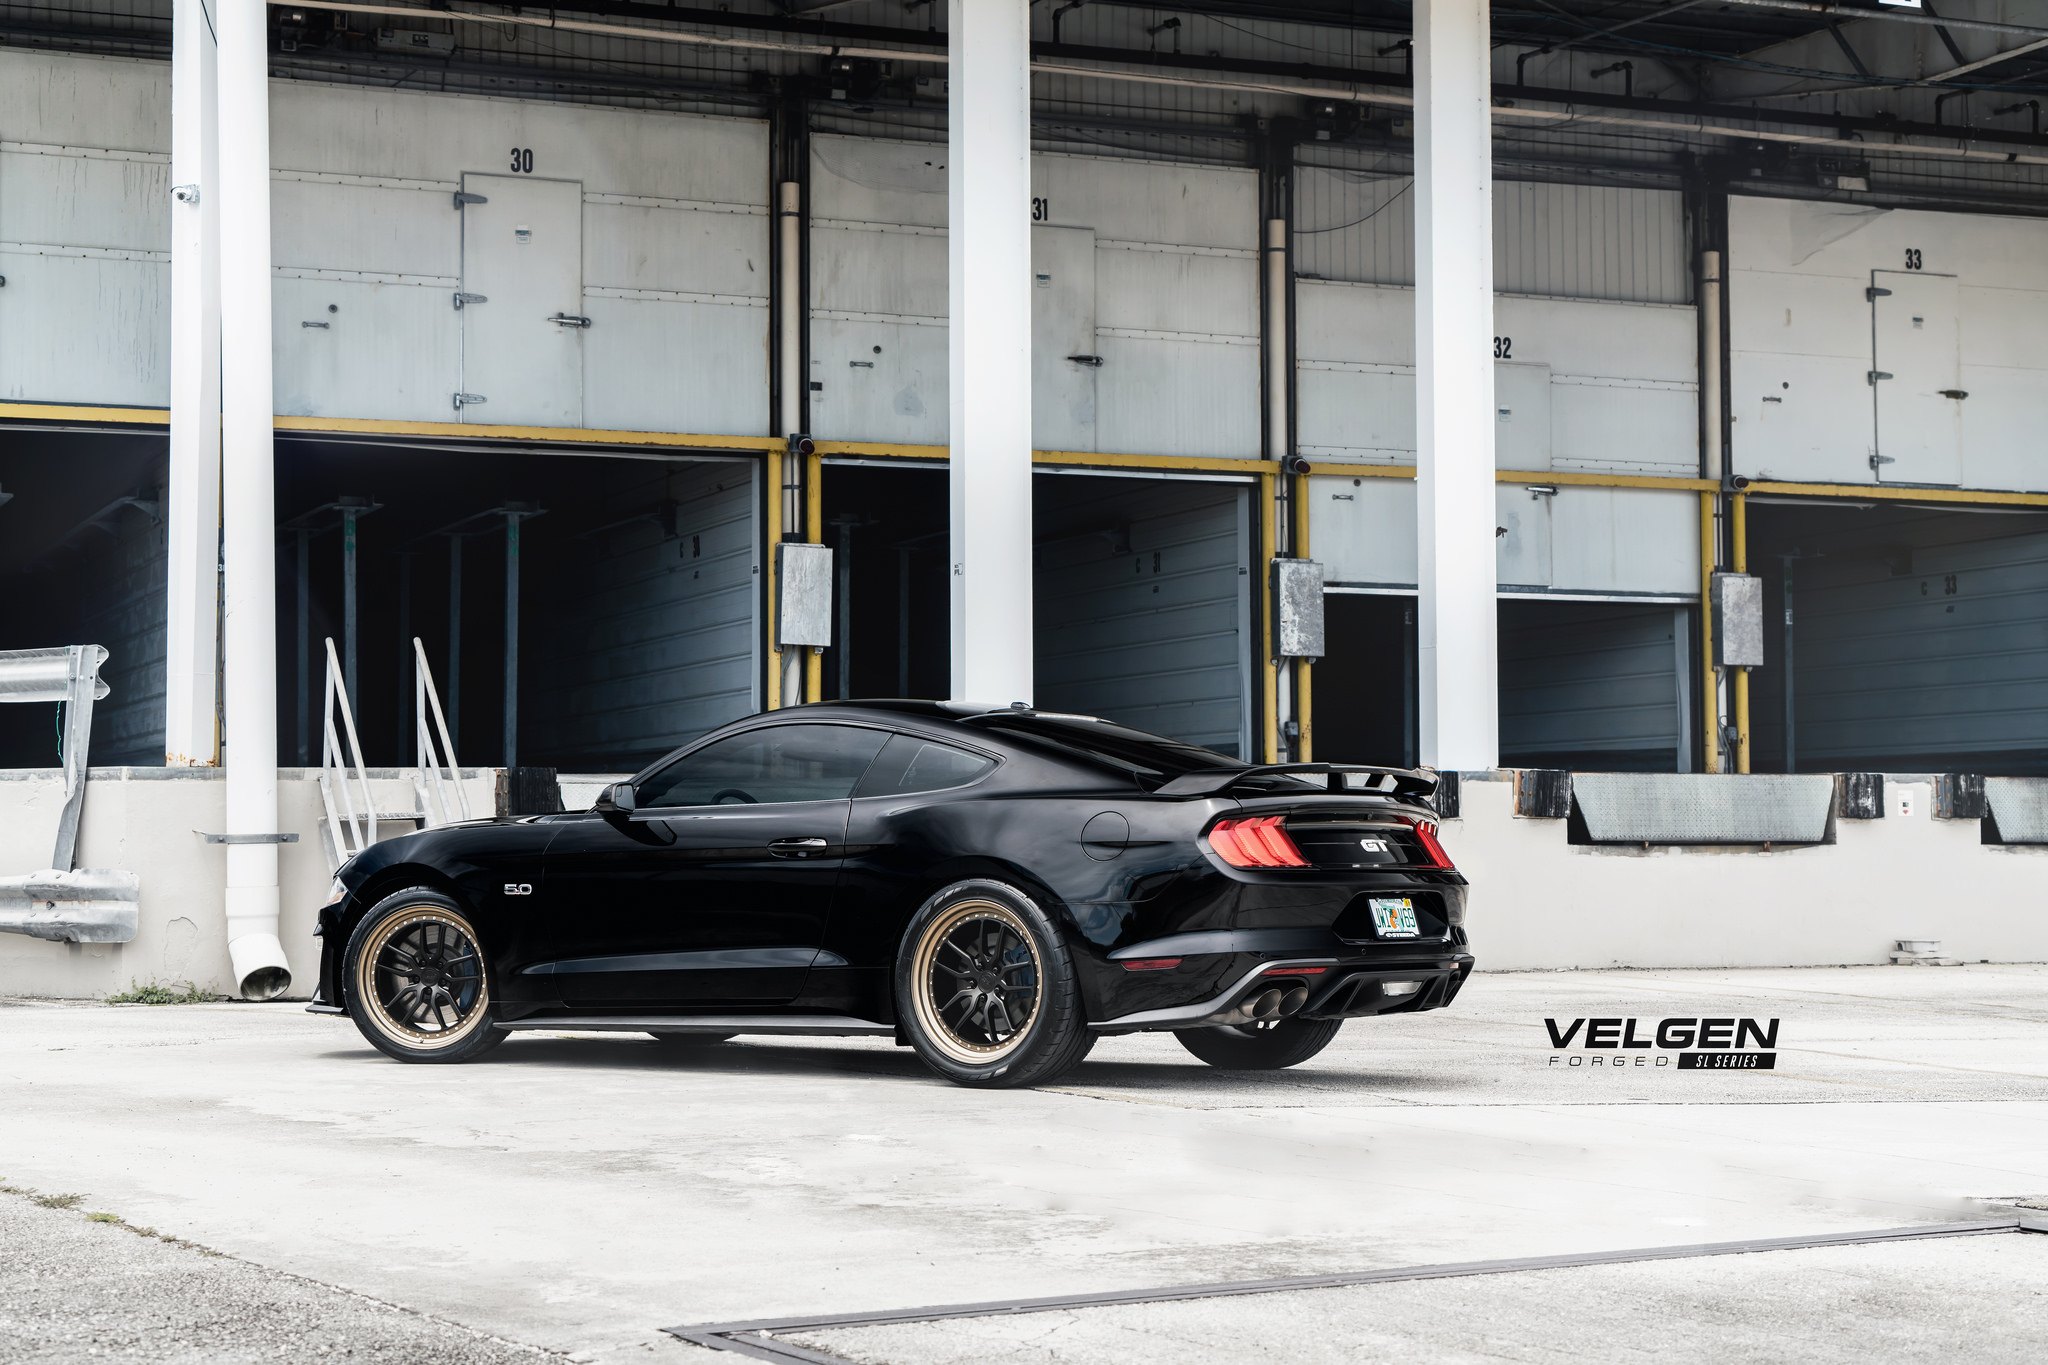 Aftermarket Rear Diffuser on Black Ford Mustang GT - Photo by Velgen Wheels